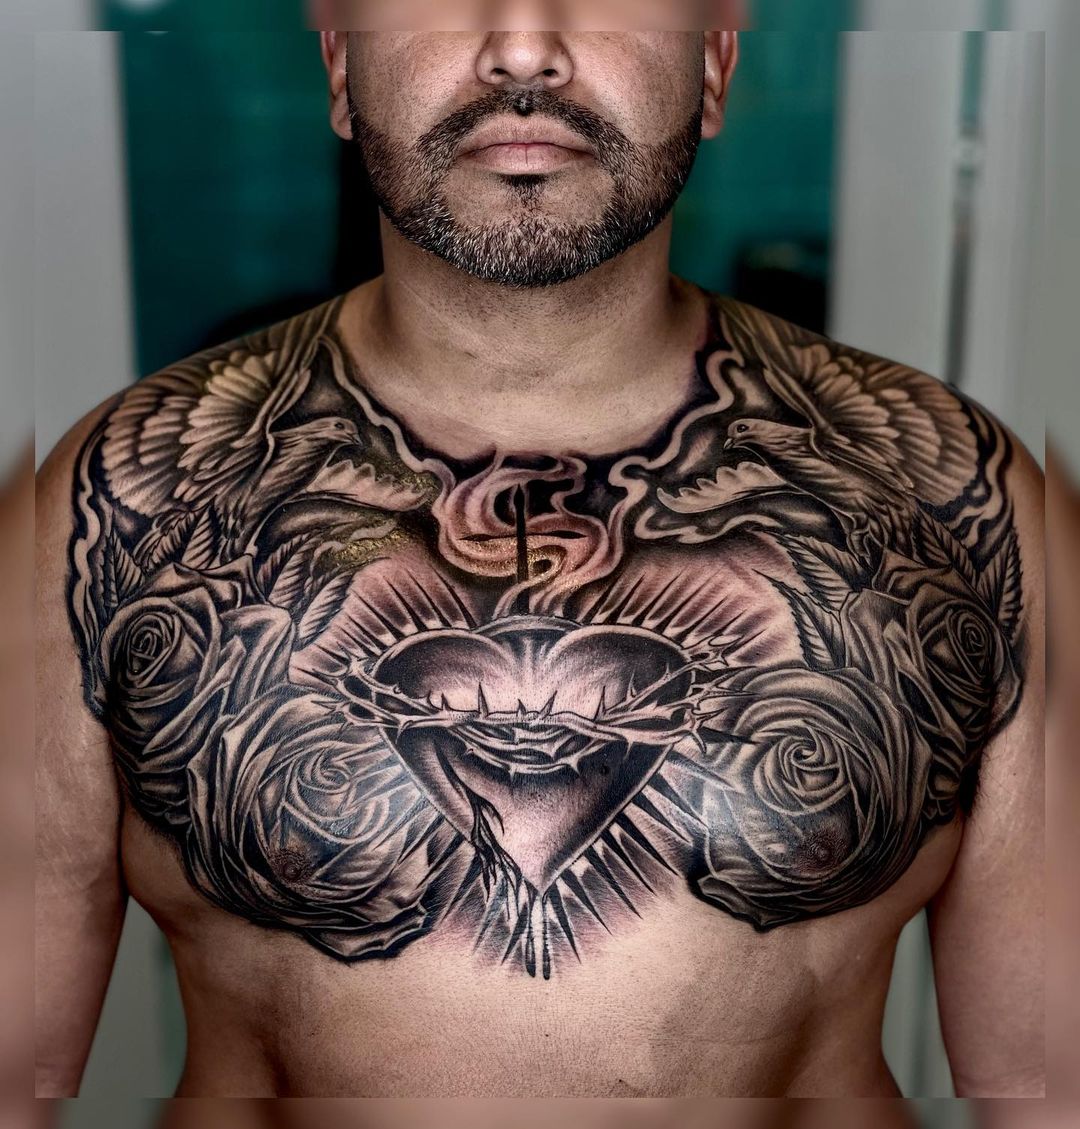 35 Mind Blowing Chest Tattoos For Men That You Would Love To Have - Psycho Tats